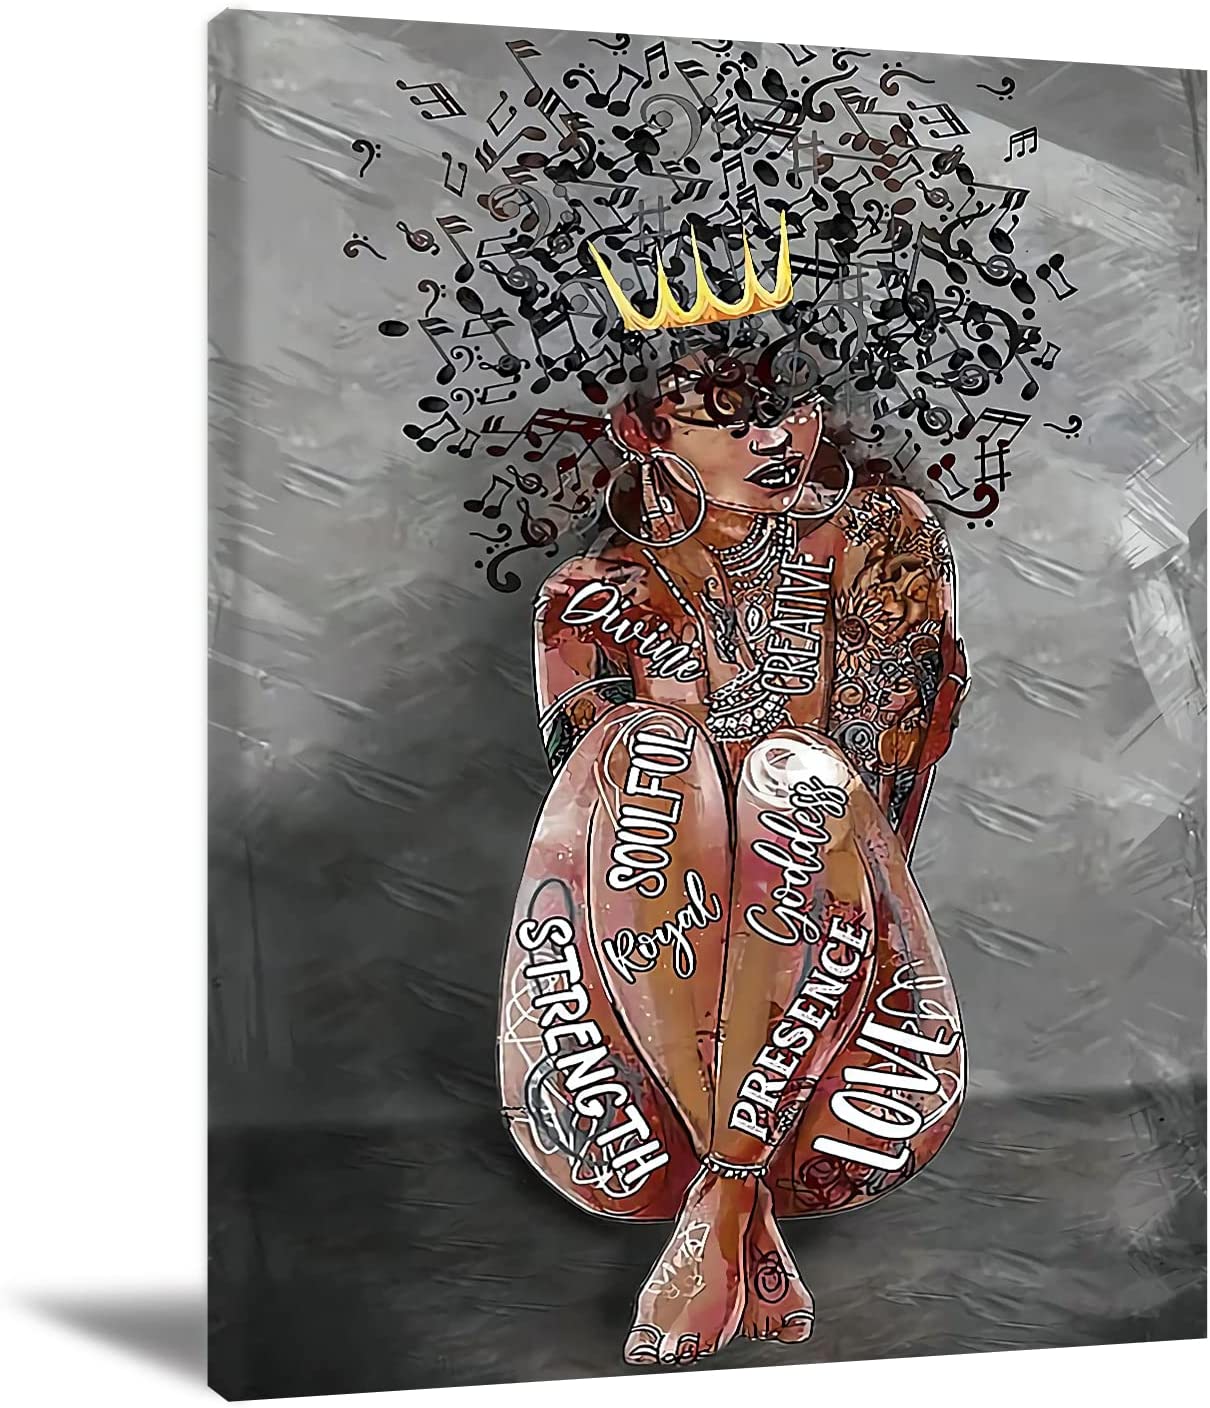 Black Girl Canvas, Black Queen Wall Art Africa America Poster Black Woman Love Music Canvas Wall Art Abstract Contemporary Canvas Matte Prints Painting Home Decor For Bedroom Living Room